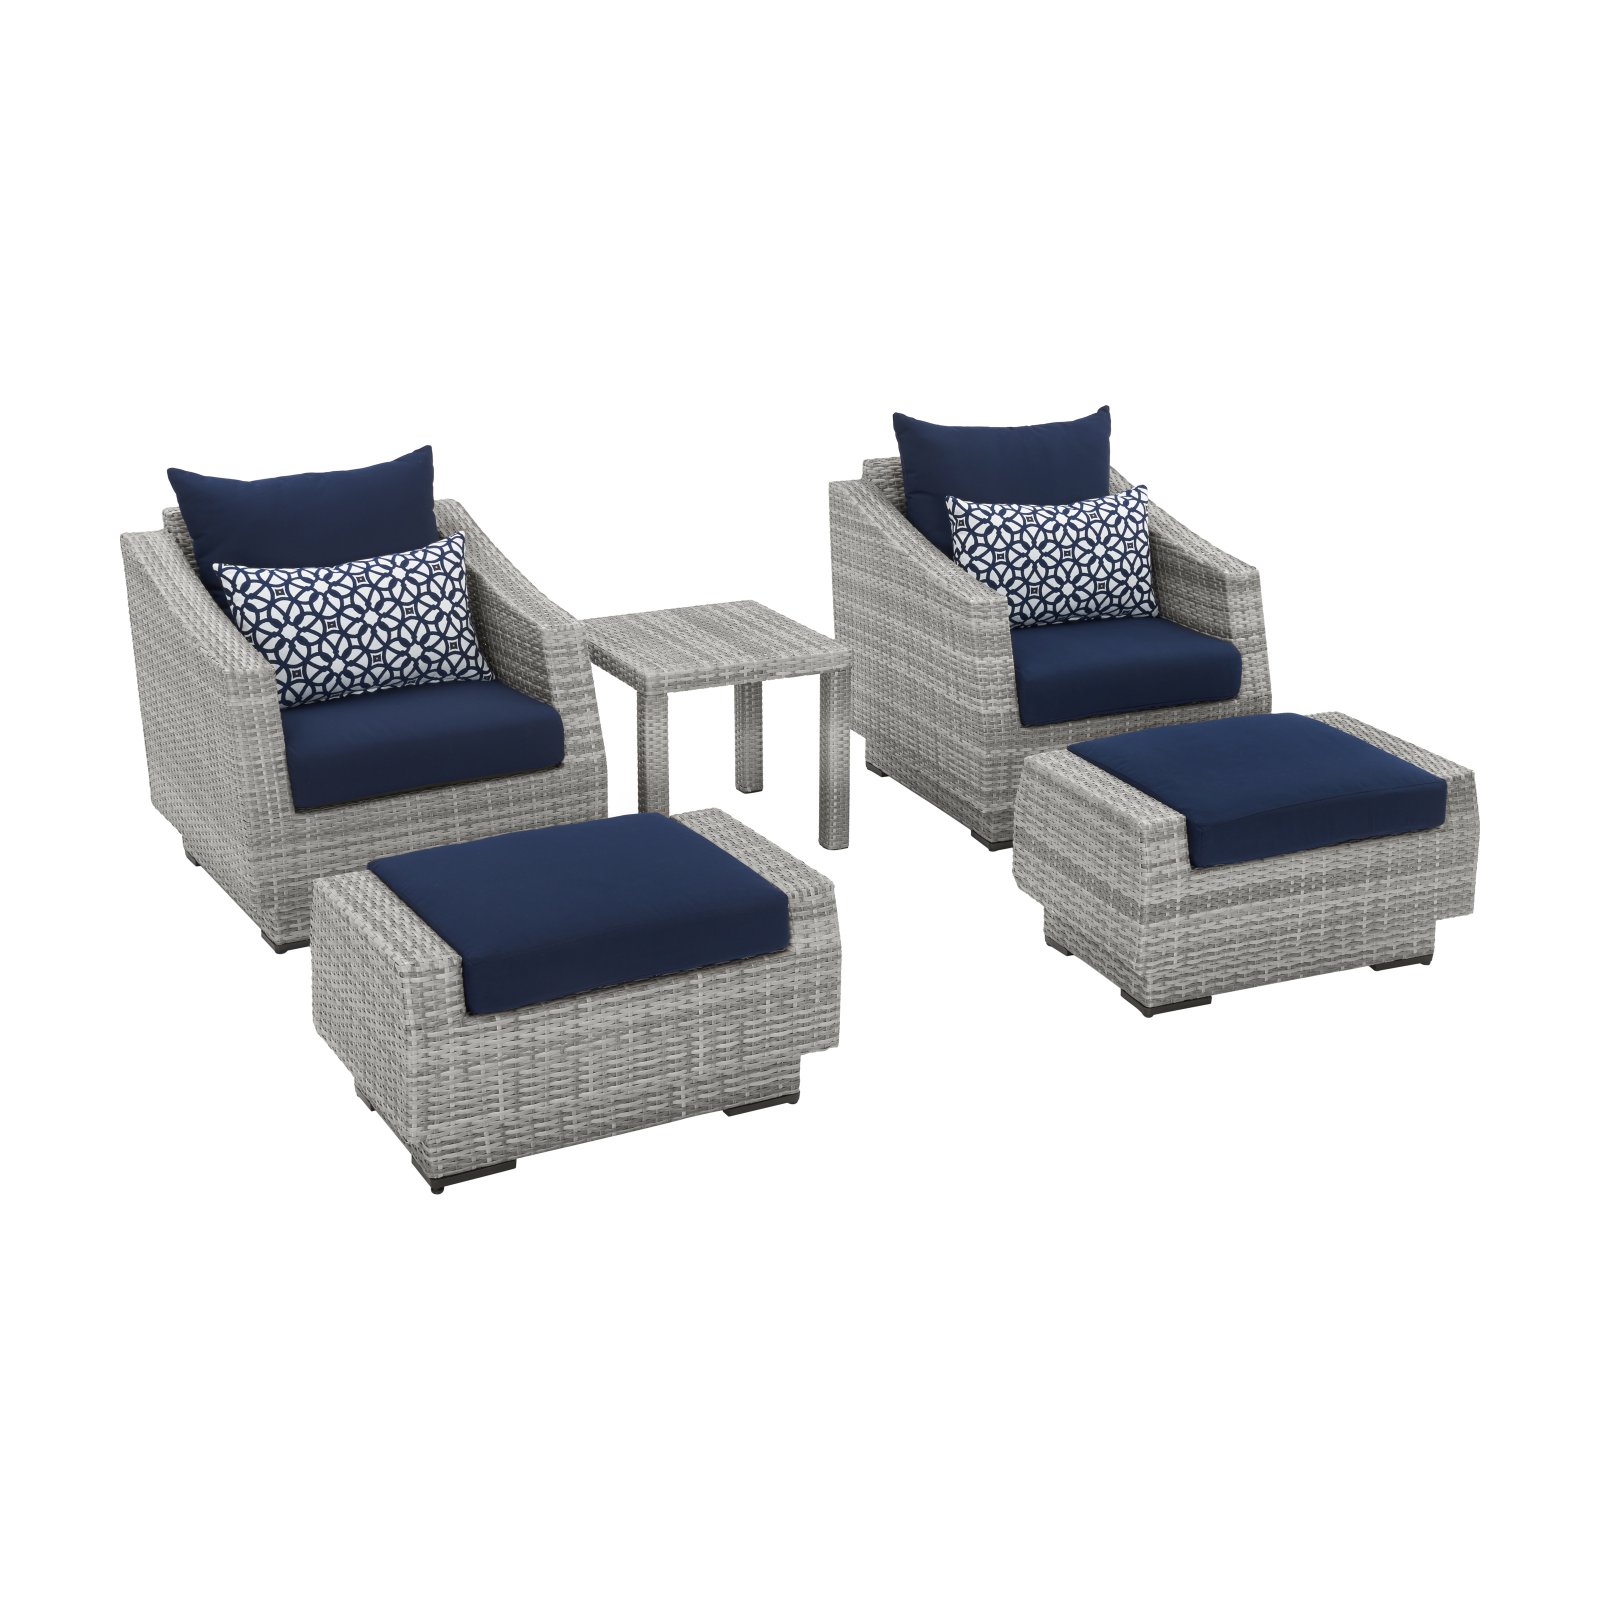 RST Brands Cannes Resin Wicker 5 Piece Patio Conversation Set - image 2 of 11